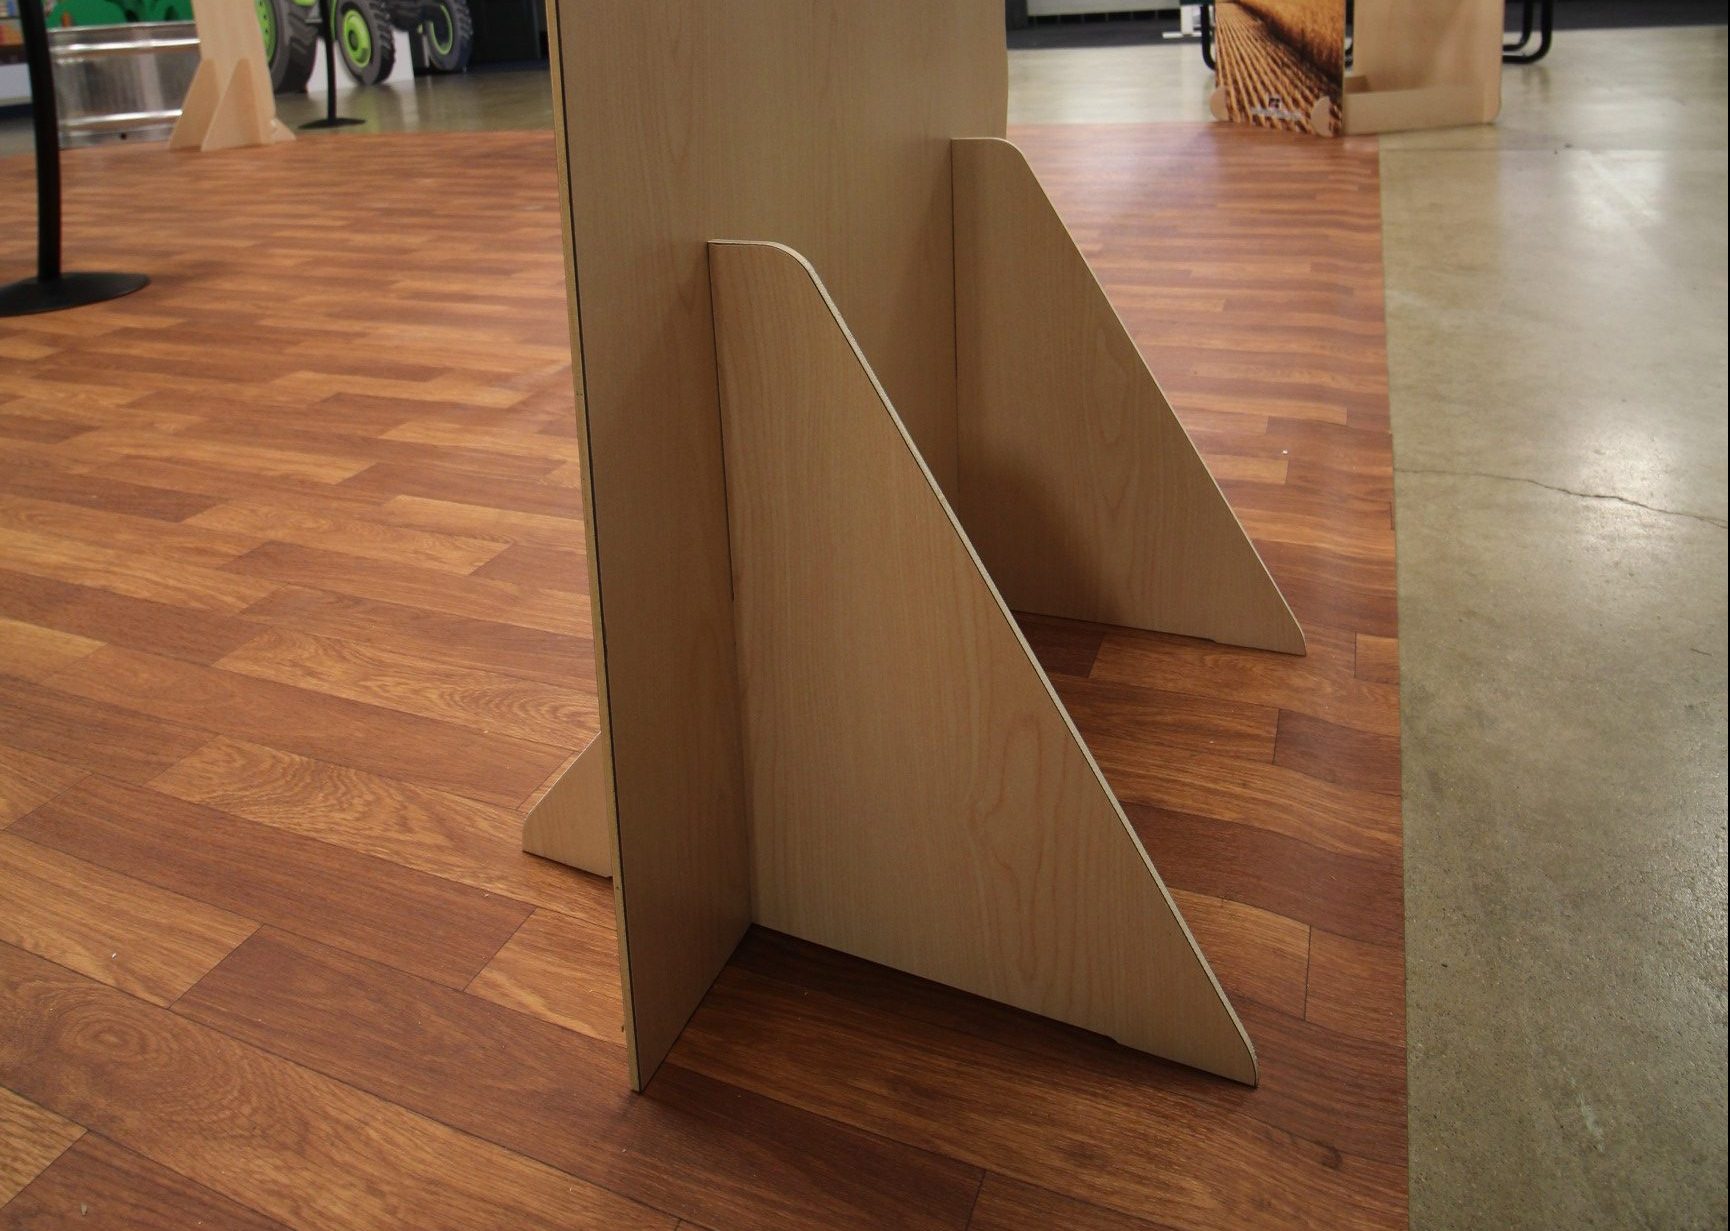 2 triangular support pieces at the base of the cutout stand-ups.